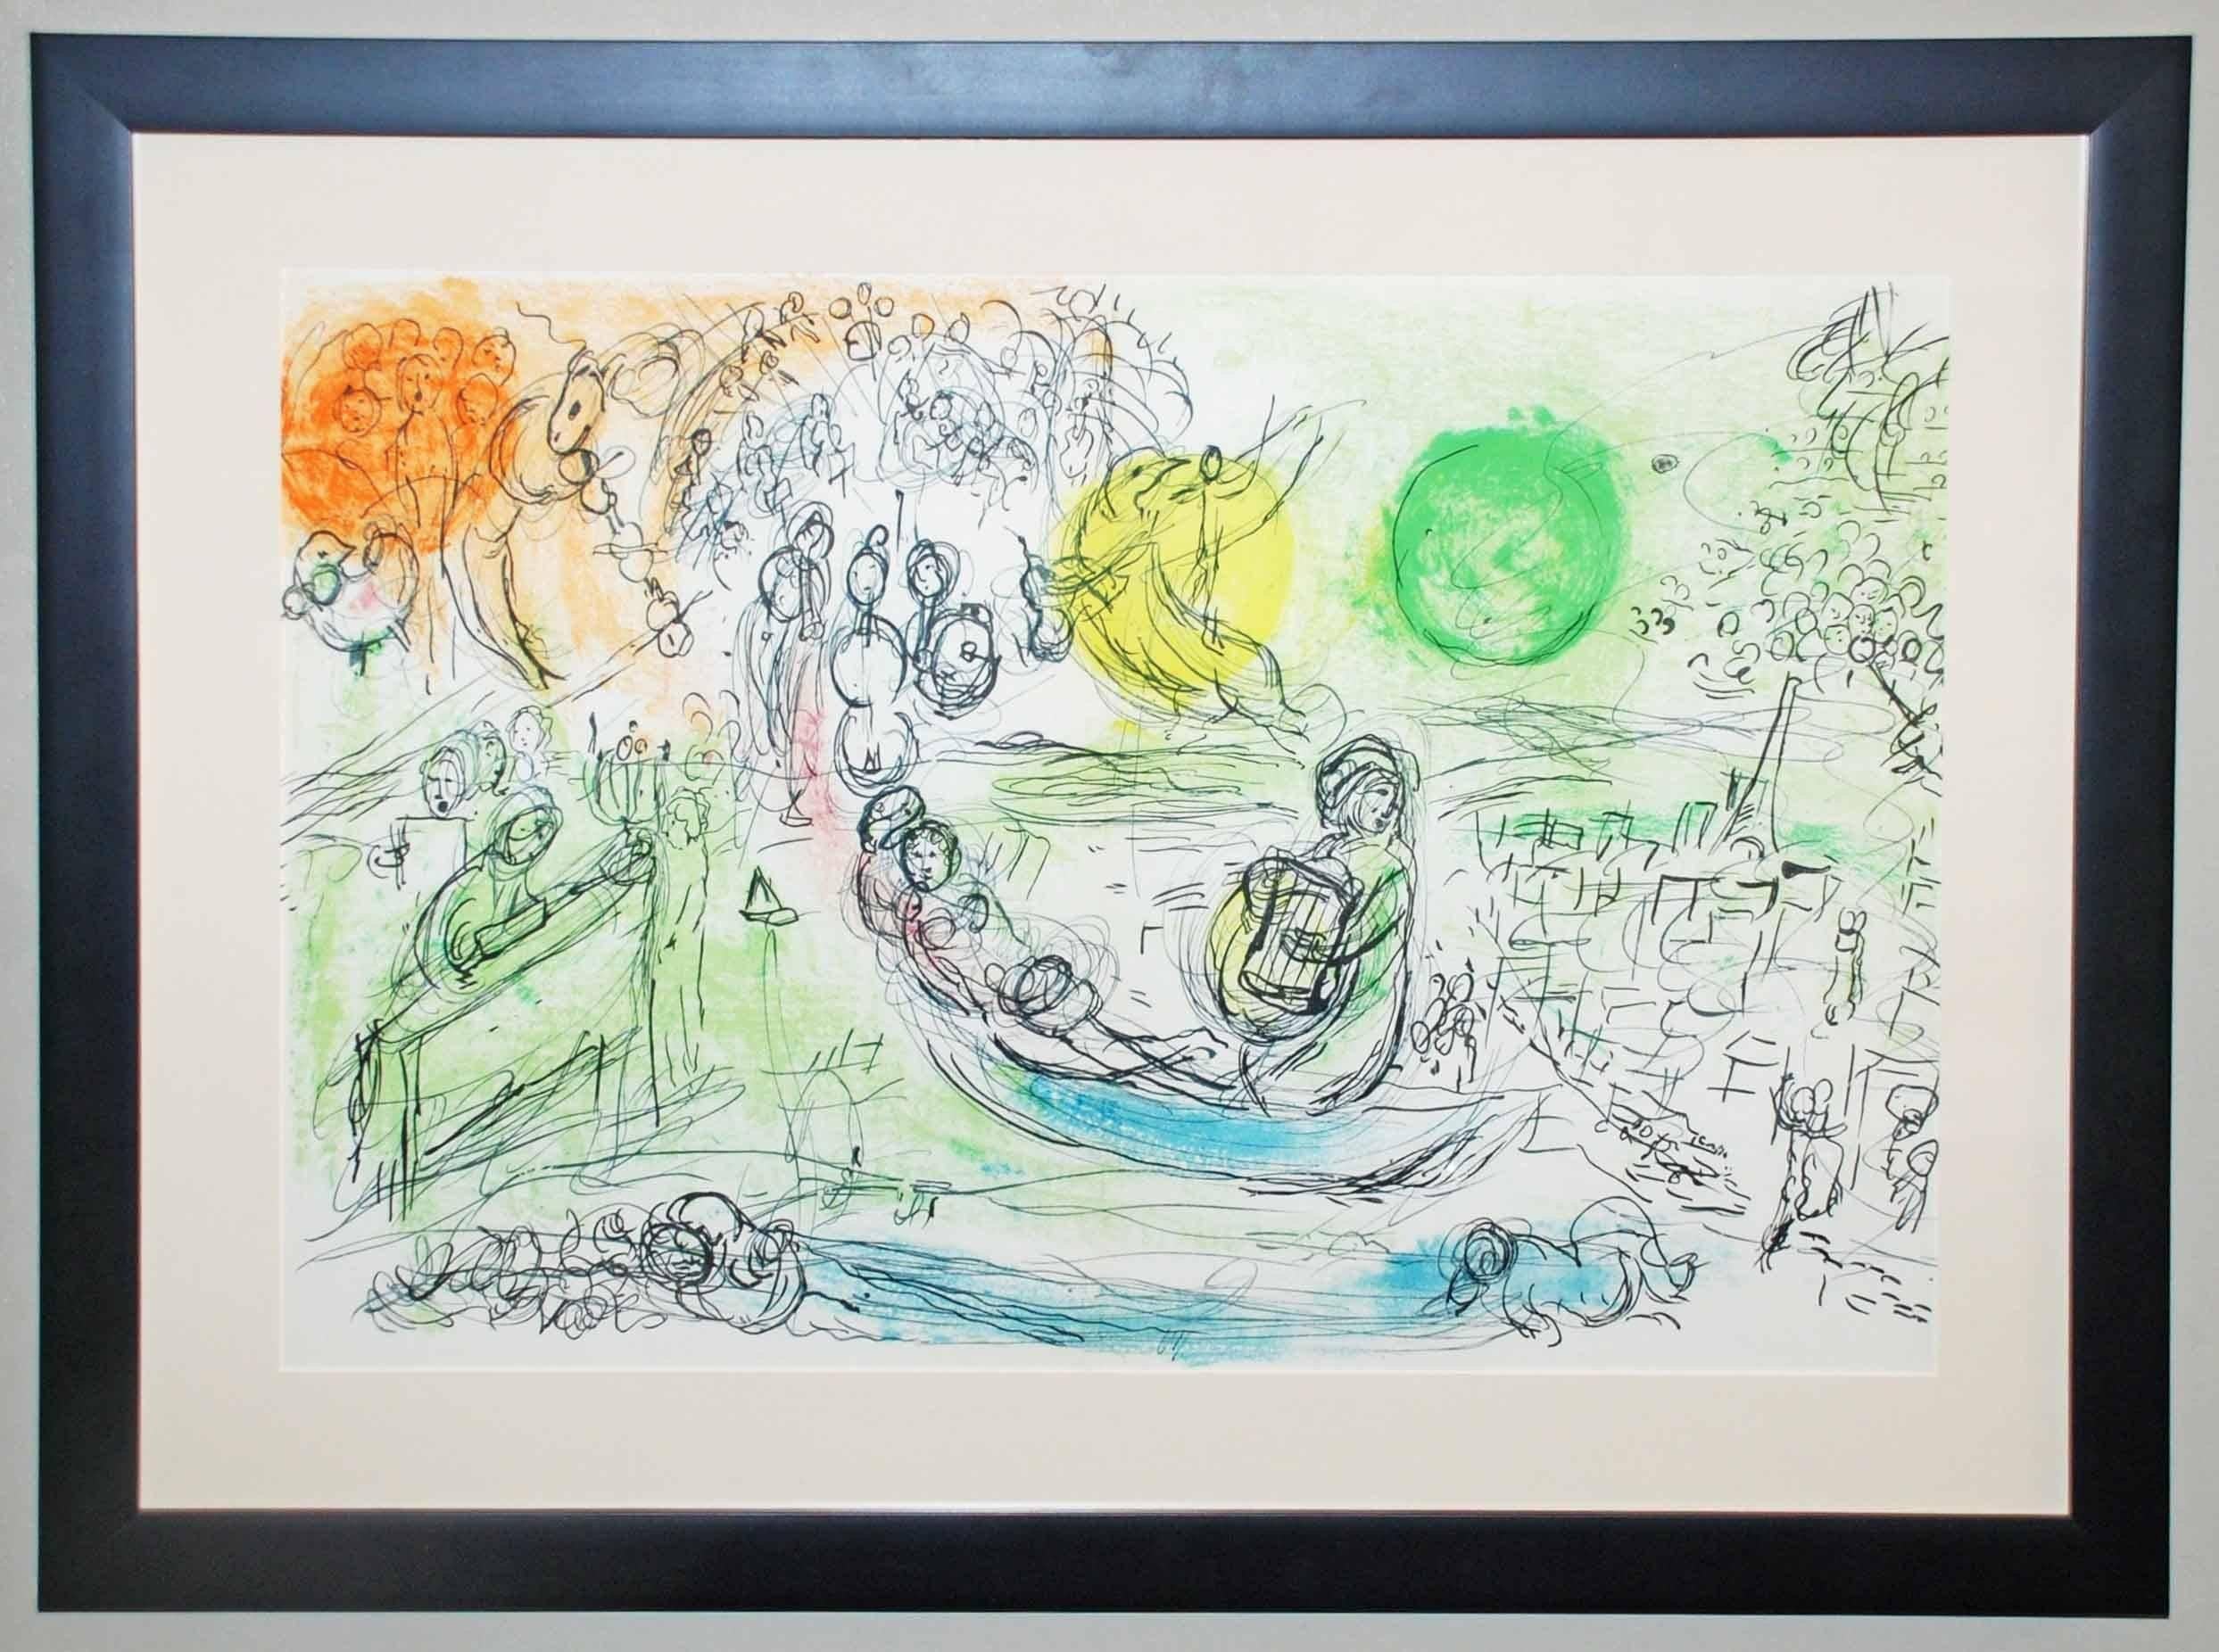 The Concert - Print by Marc Chagall